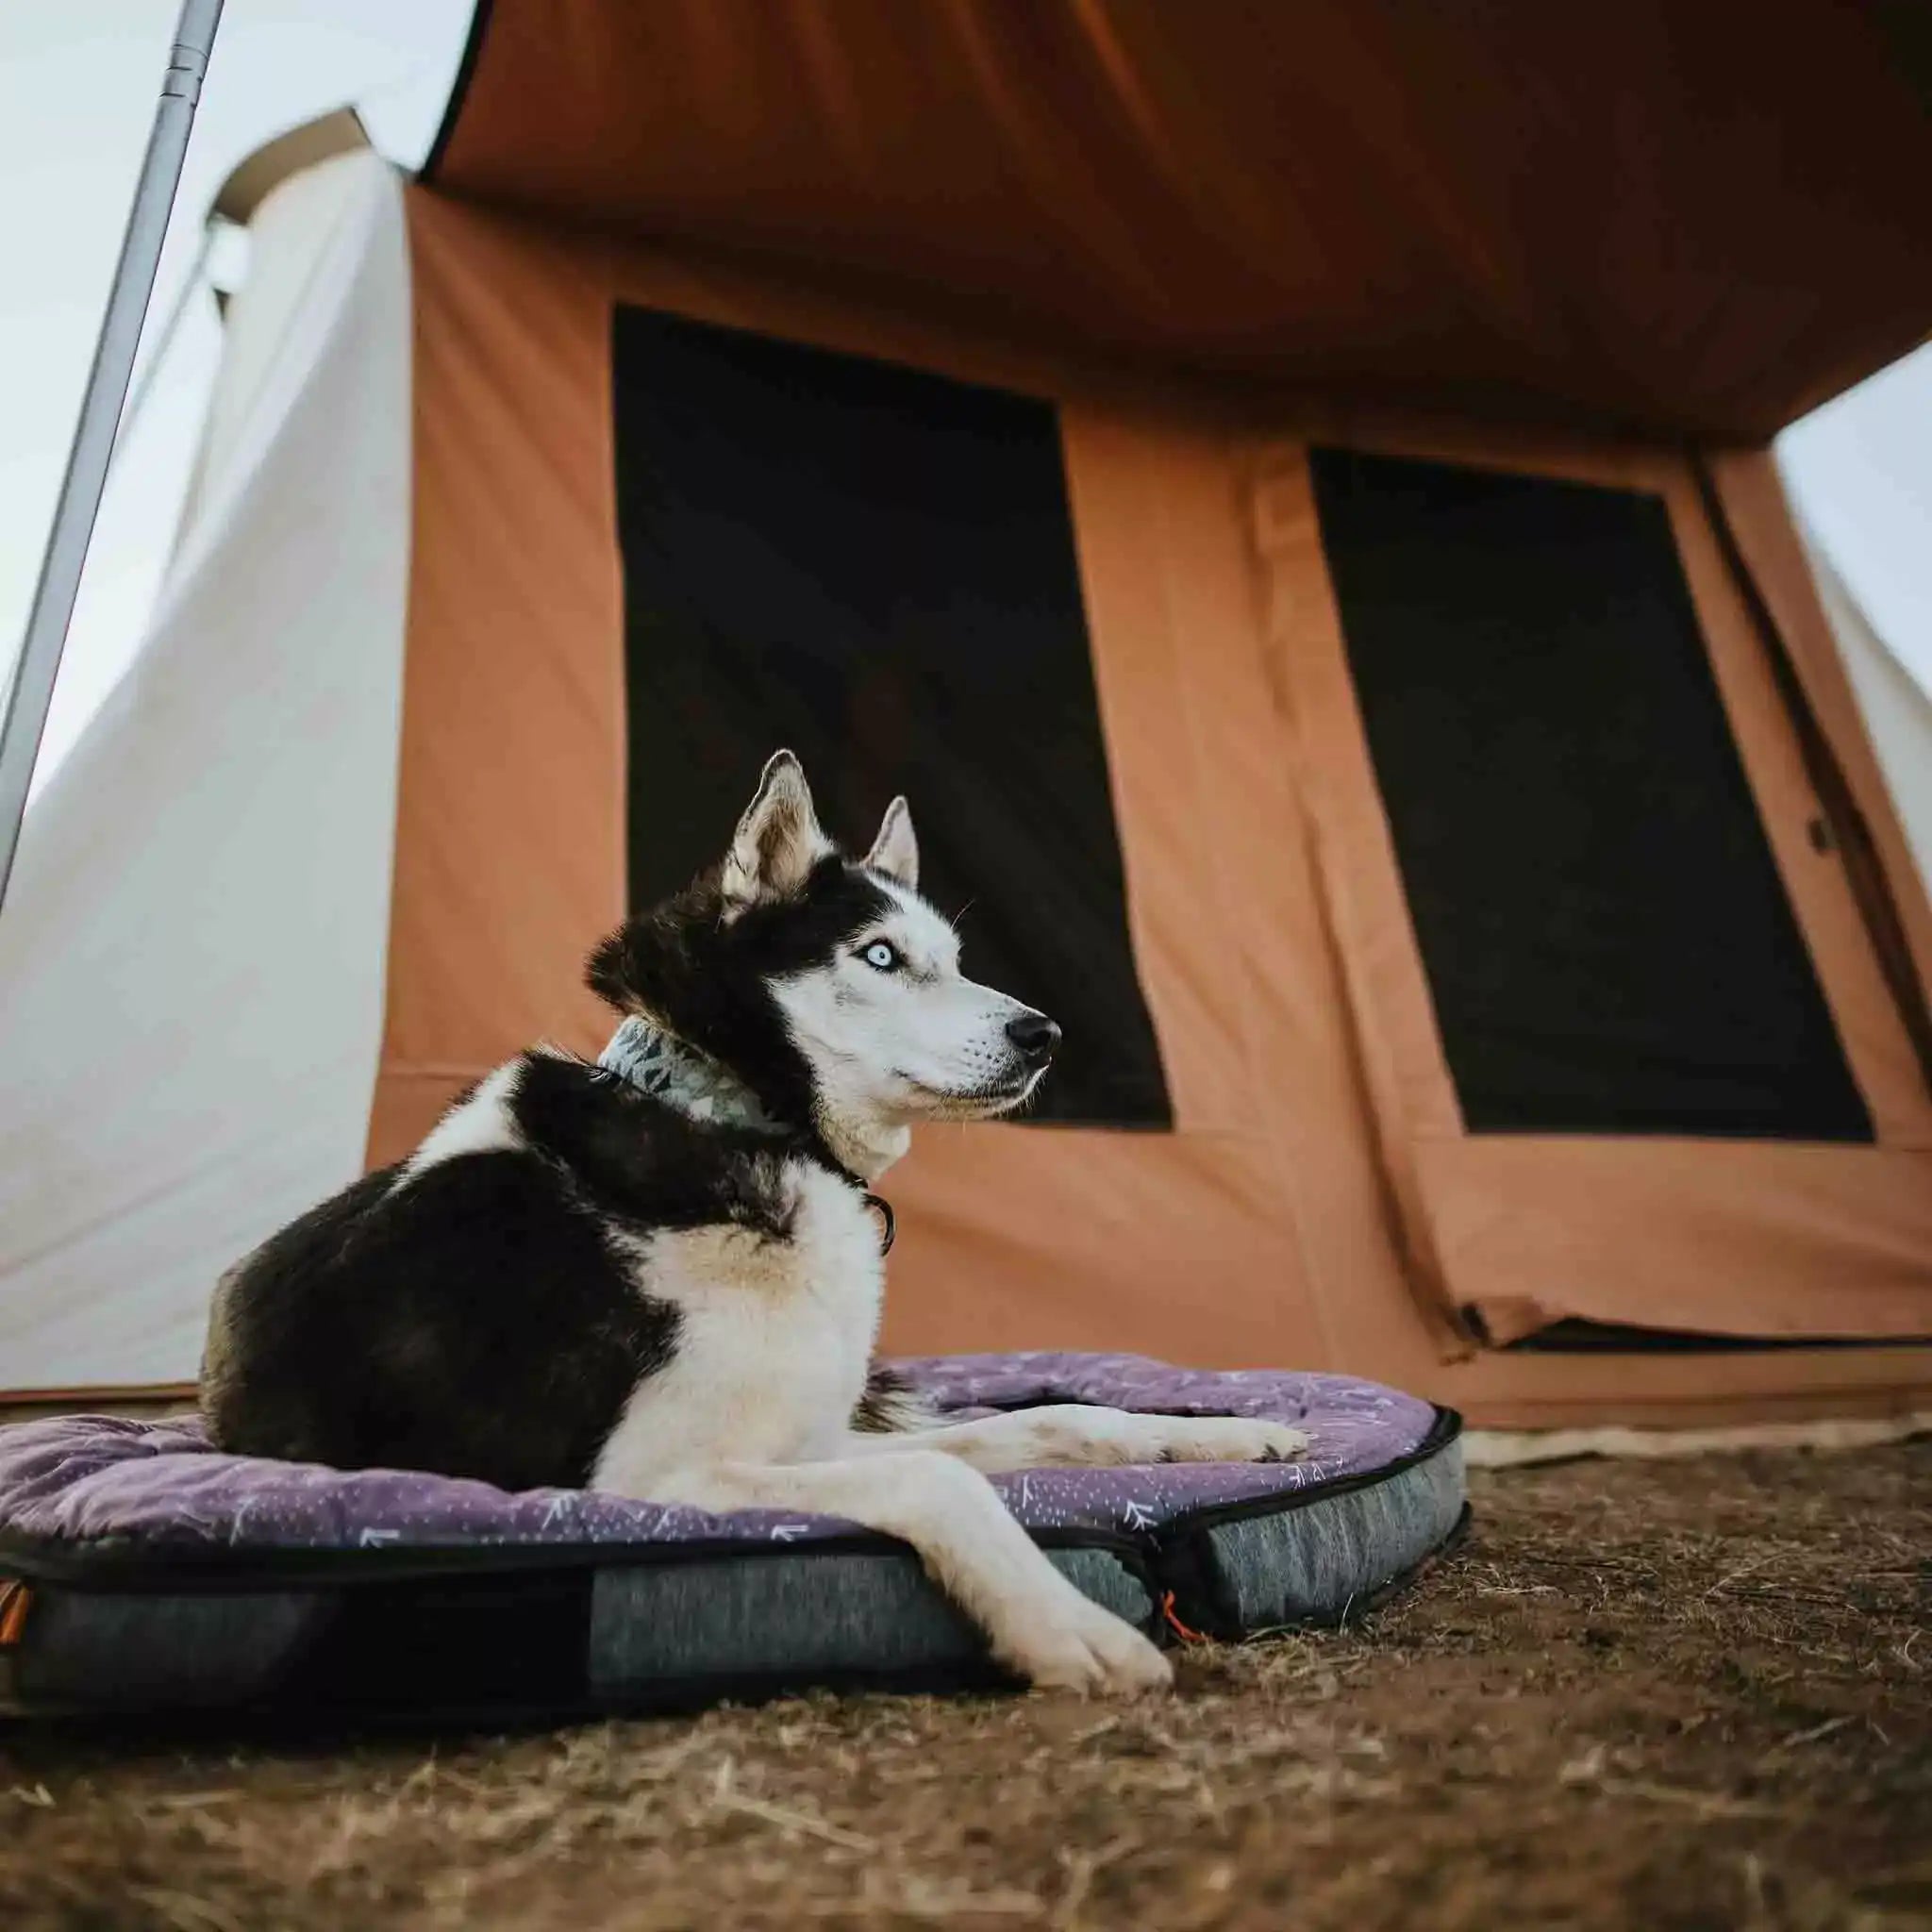 husky dog sitting on a dog bed in front of a prota canvas tent